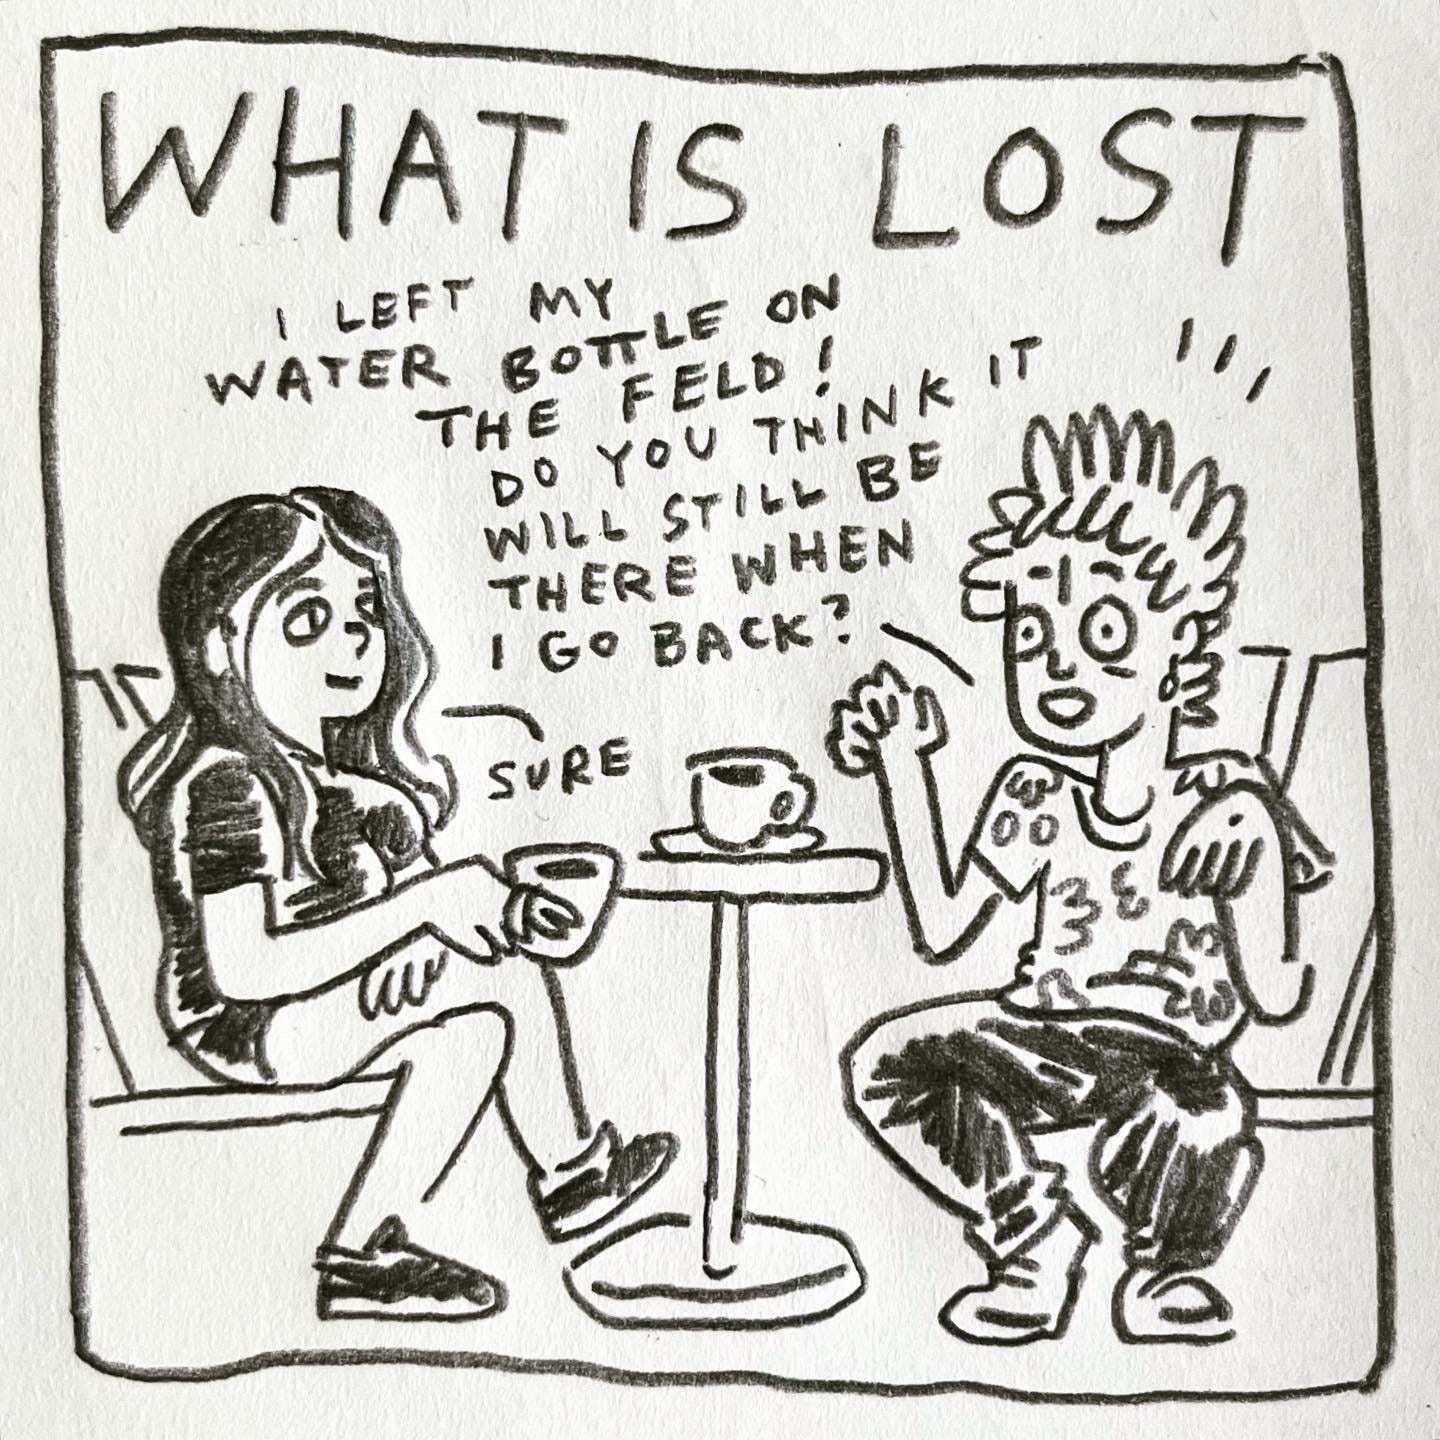 Panel 3: what is lost Image: Lark sits on a bench across from a friend with long dark hair and short shorts. Both are drinking cappuccinos. There is a small table in between them. Lark’s hands jump in alarm, and they exclaim “I left my water bottle on the feld! Do you think it will still be there when I go back?" Their friend, relaxed, says "sure"